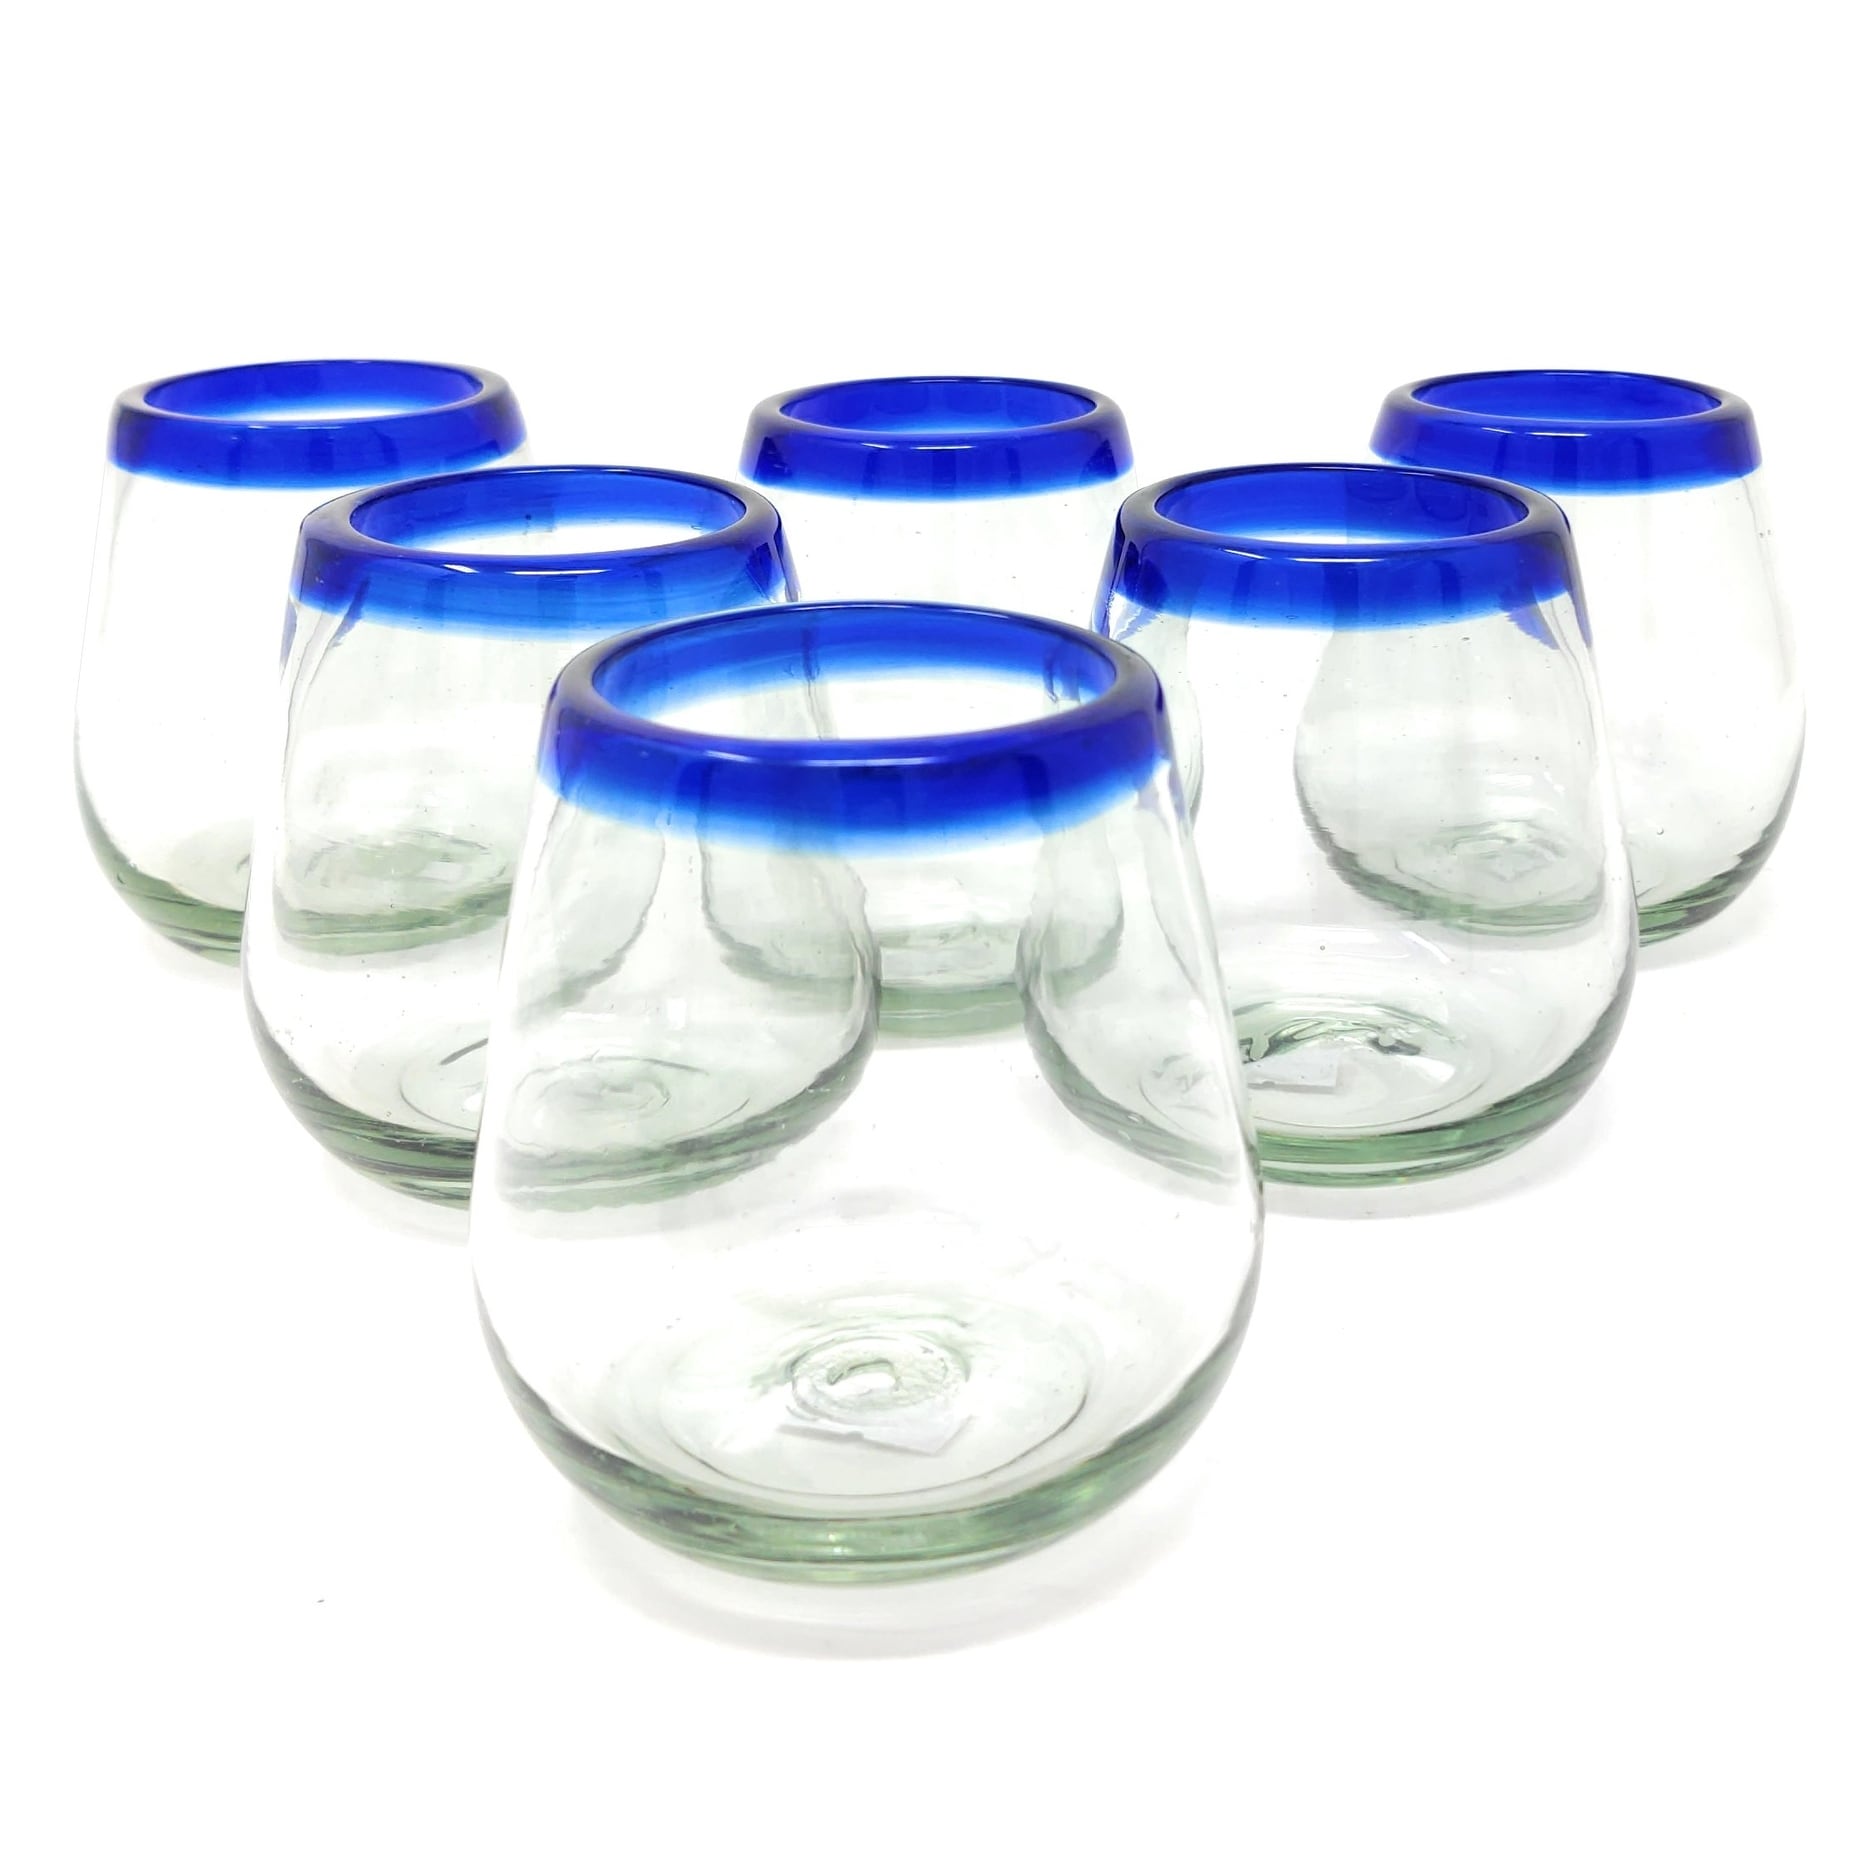 https://ak1.ostkcdn.com/images/products/is/images/direct/4cdd0c4ef0d6538bdf178ab12800f501f86b6cde/Hand-Blown-Mexican-Stemless-Wine-Glasses---Set-of-6-Glasses-with-Cobalt-Blue-Rims-%2815-oz%29.jpg